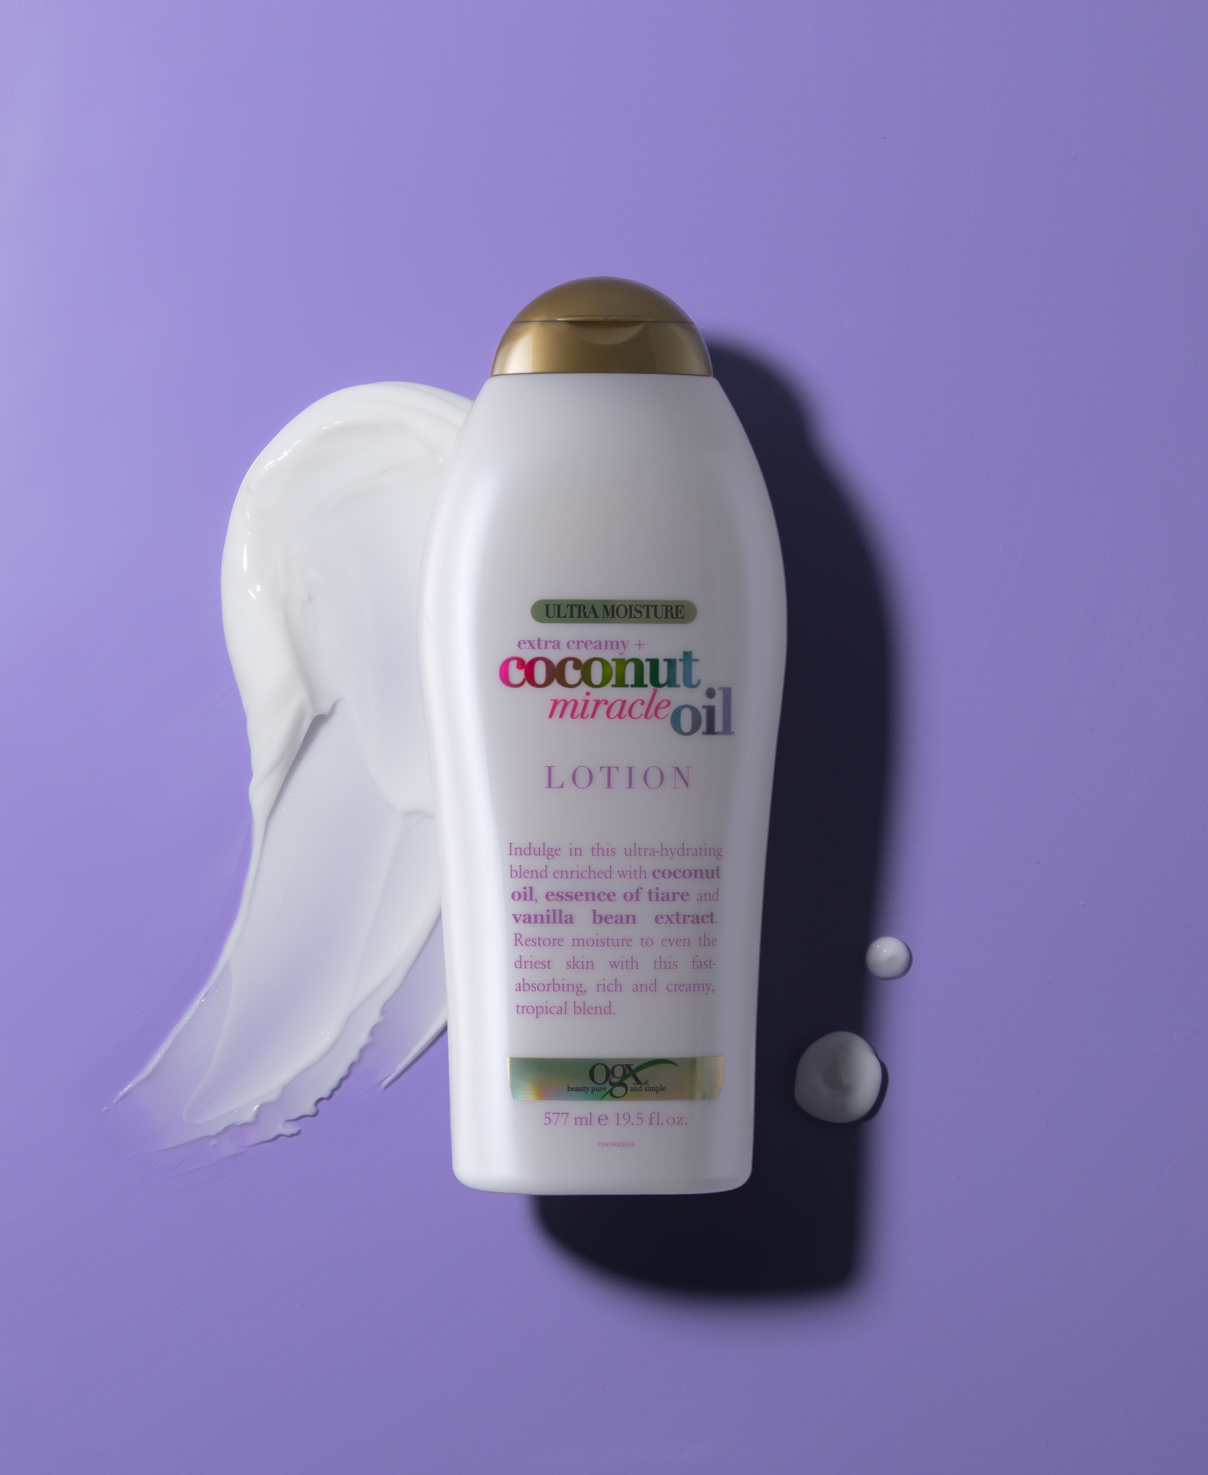 OGX Extra Creamy + Coconut Miracle Oil Ultra Moisture Lotion 19.